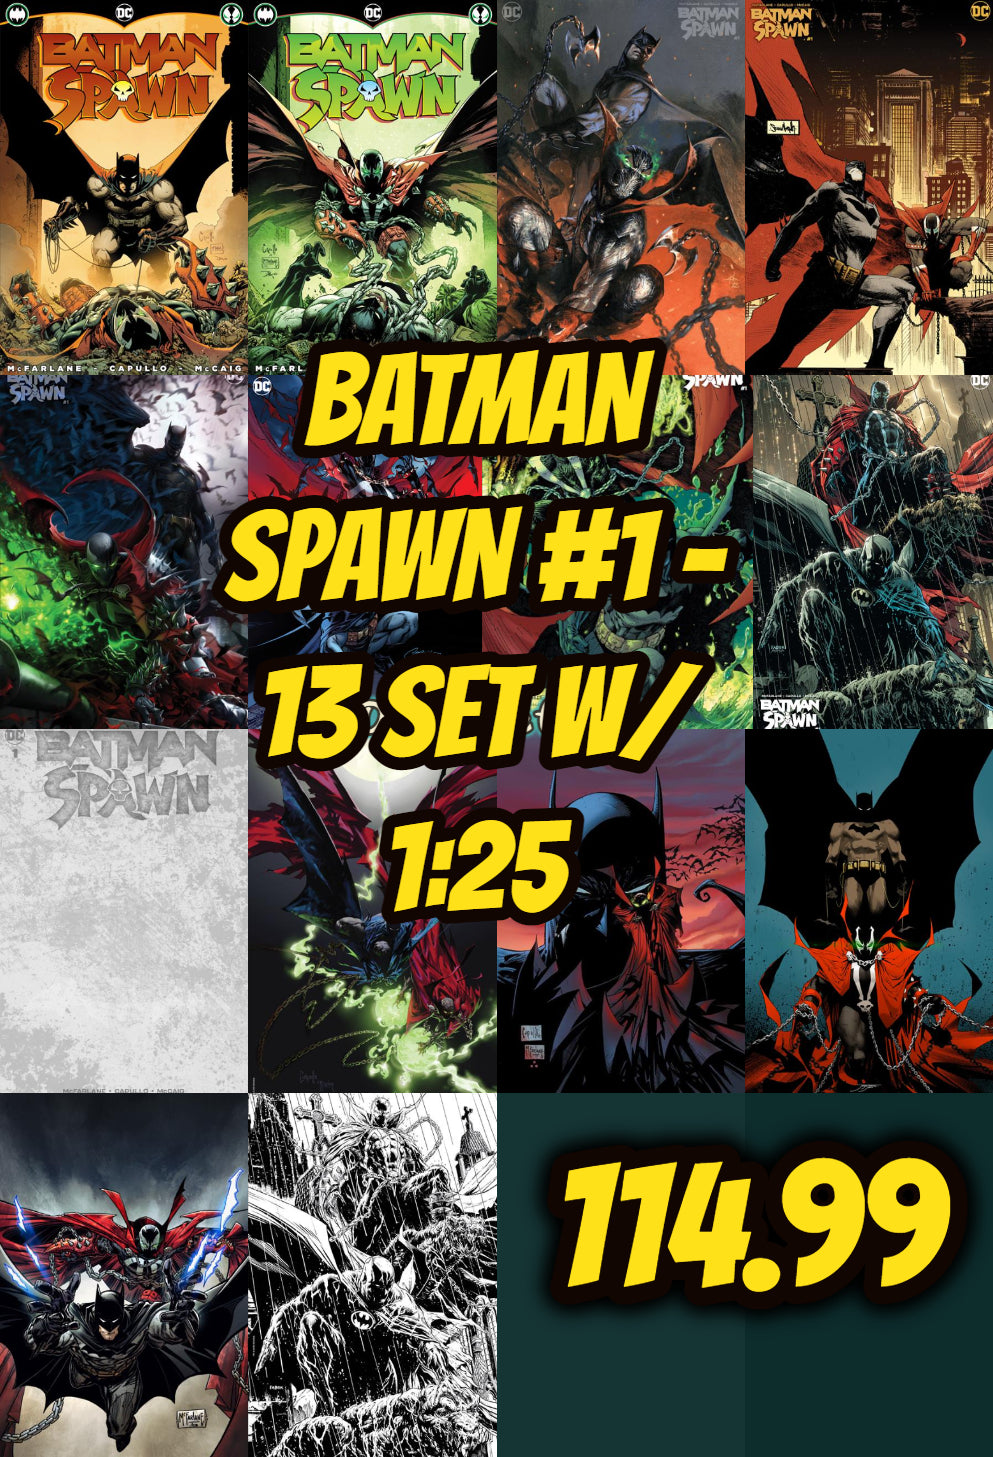 Batman Spawn #1 ALL 13 COVERS AND 1/25 RATIO SET.